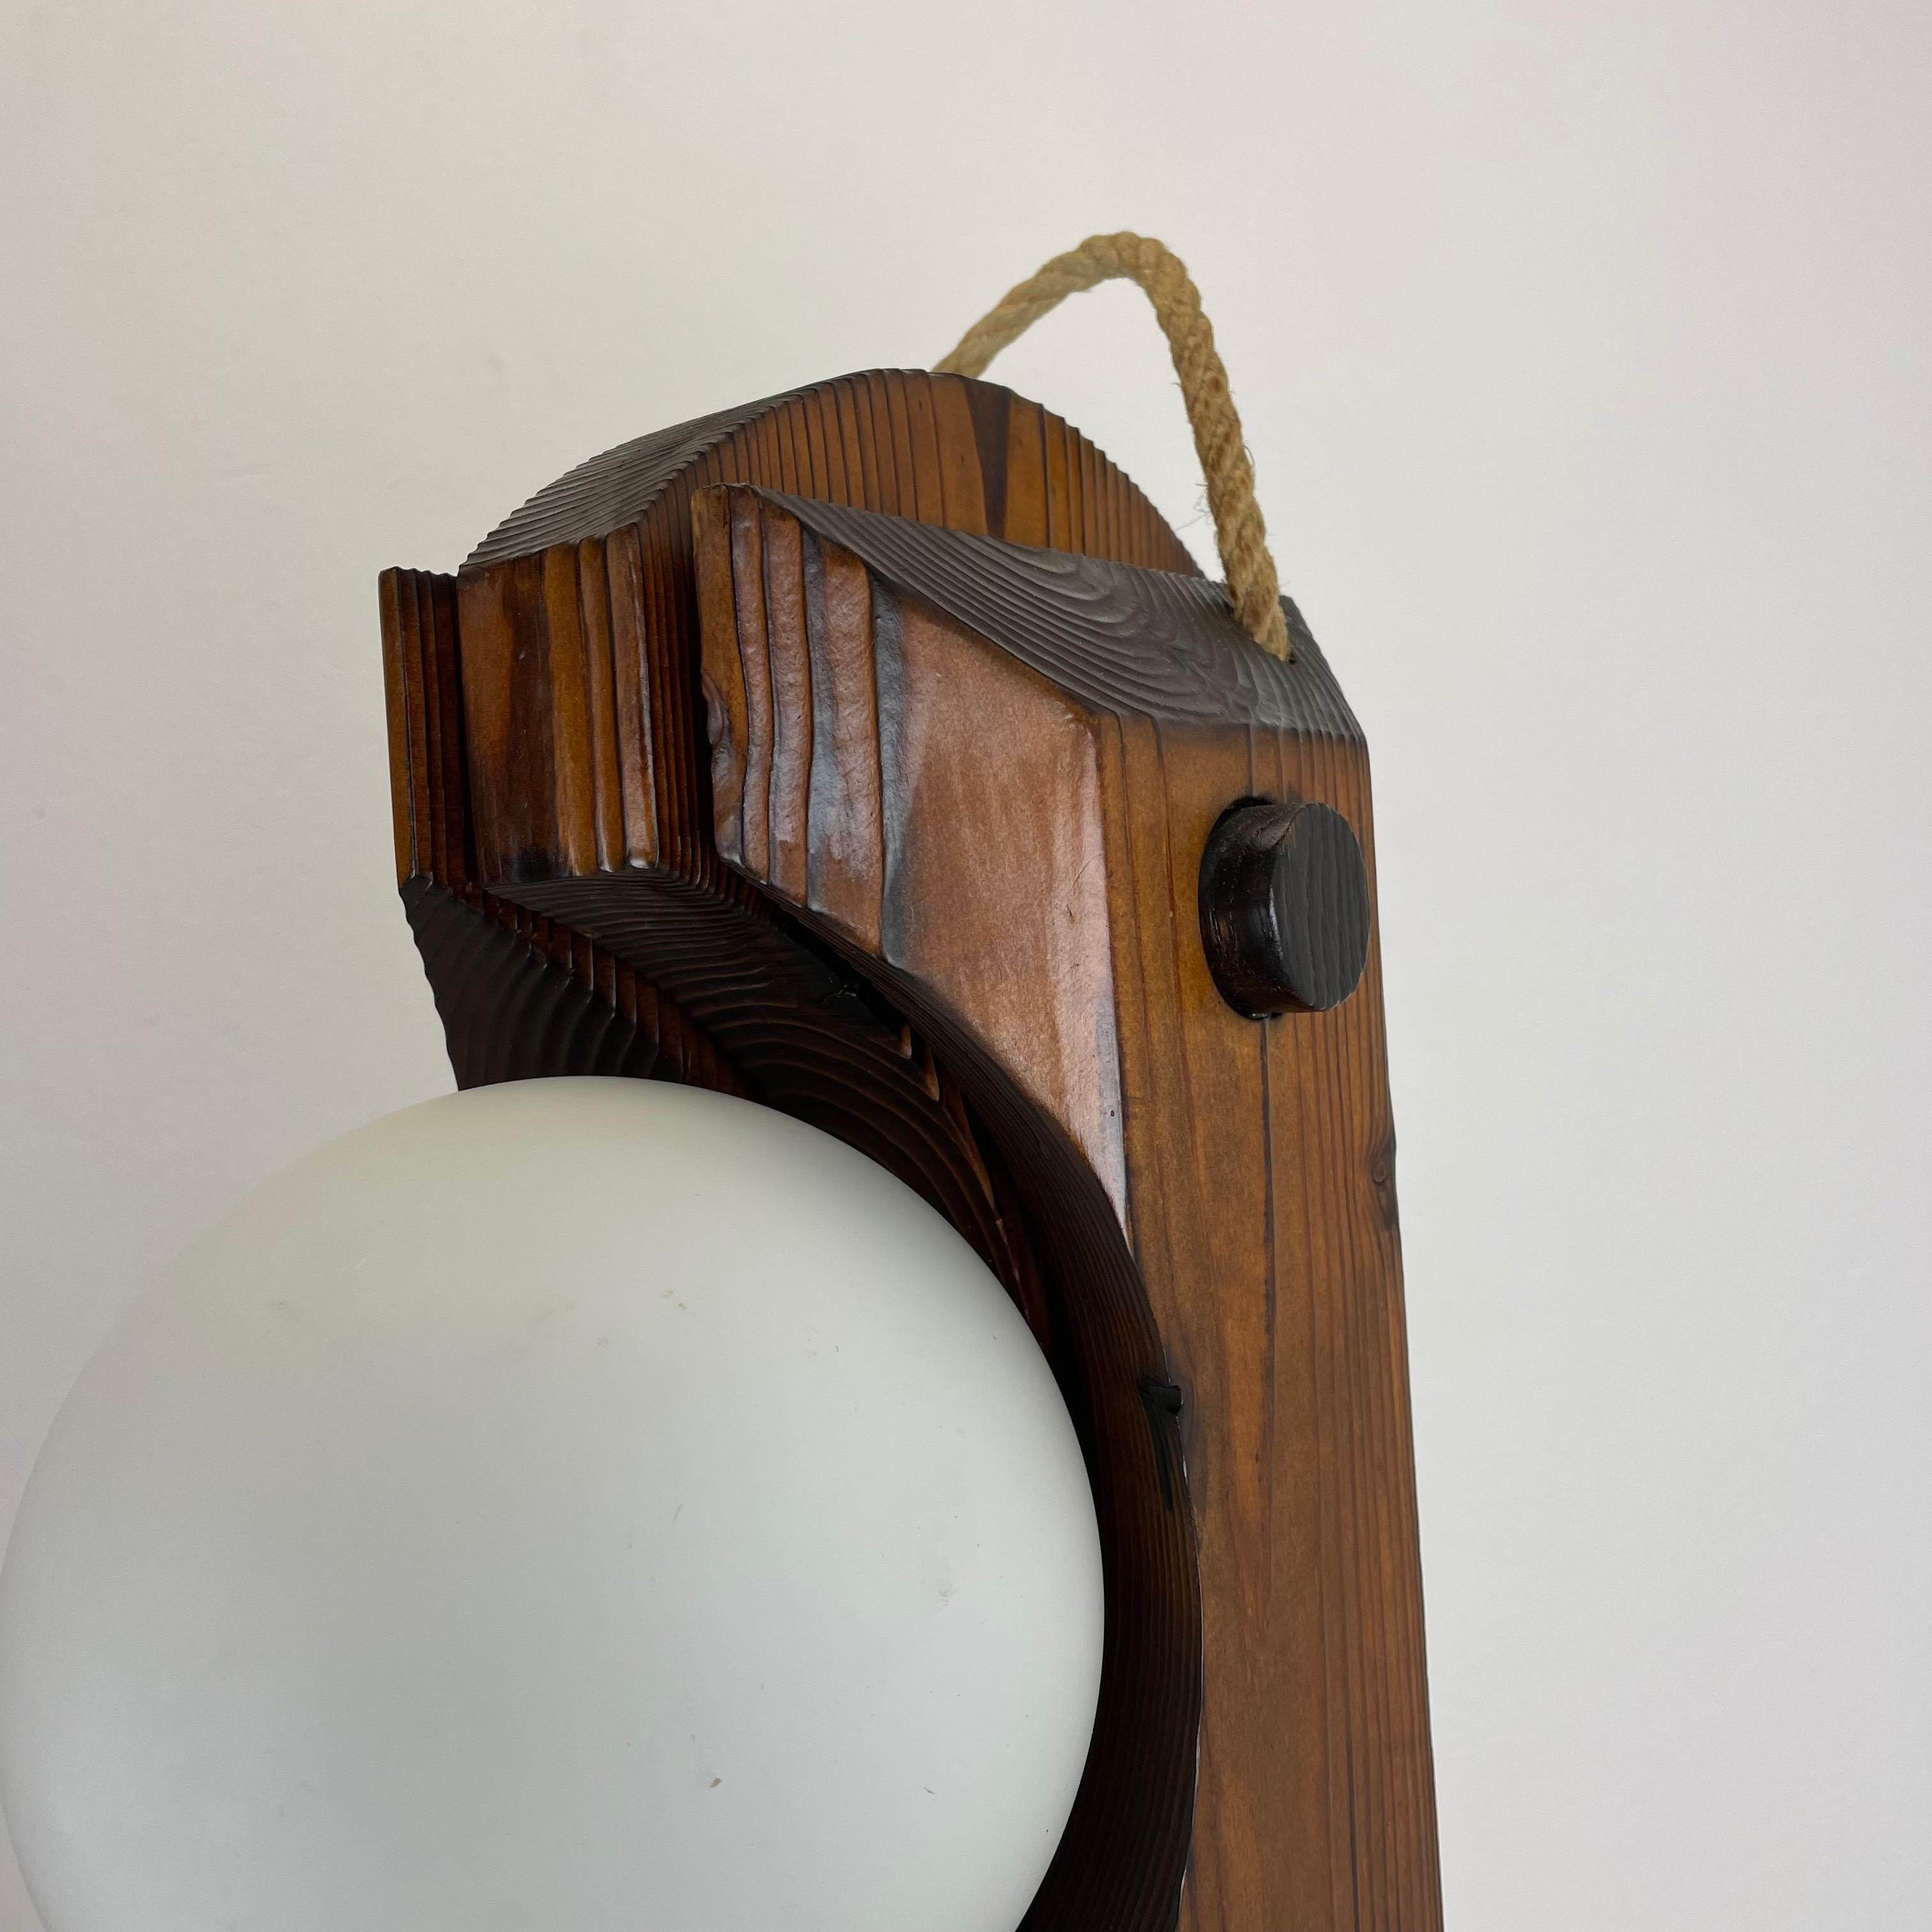 20th Century Large Organic Sculptural Pine Wooden Floor Light Made Temde Lights Germany 1970s For Sale